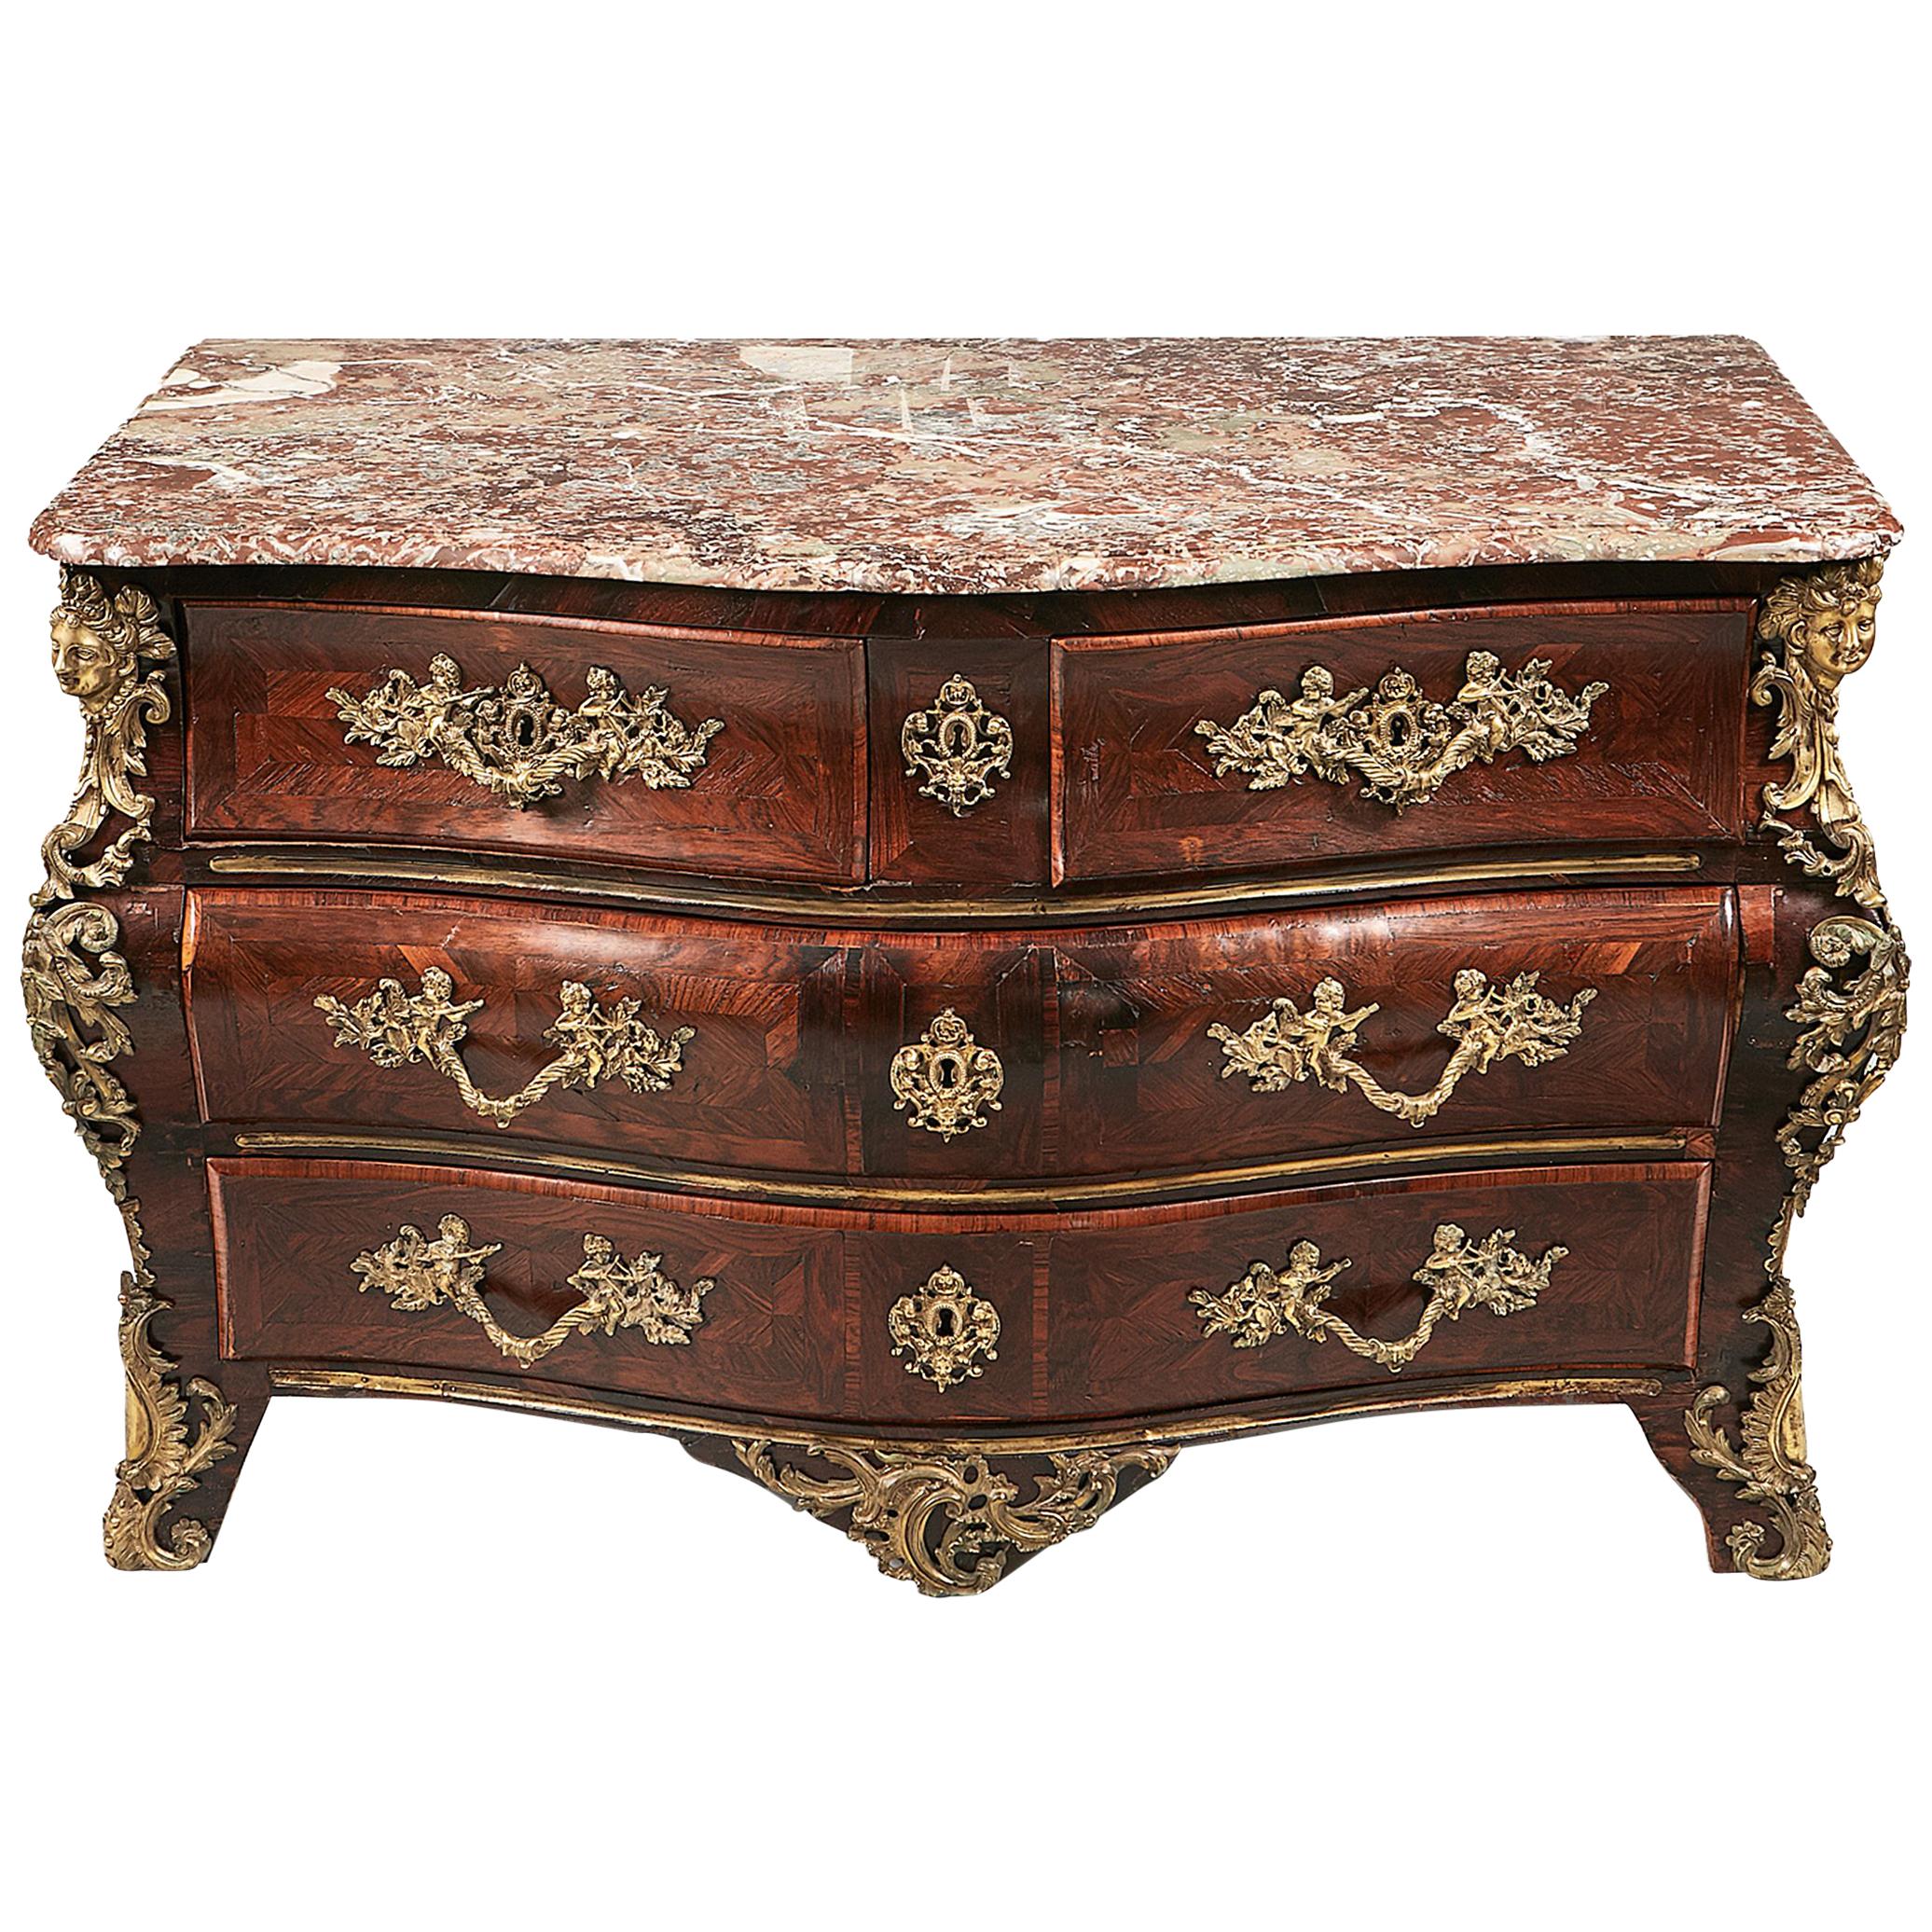 18th Century French Louis XV Marquetry Bombe Commode Signed by Louis Delaitre